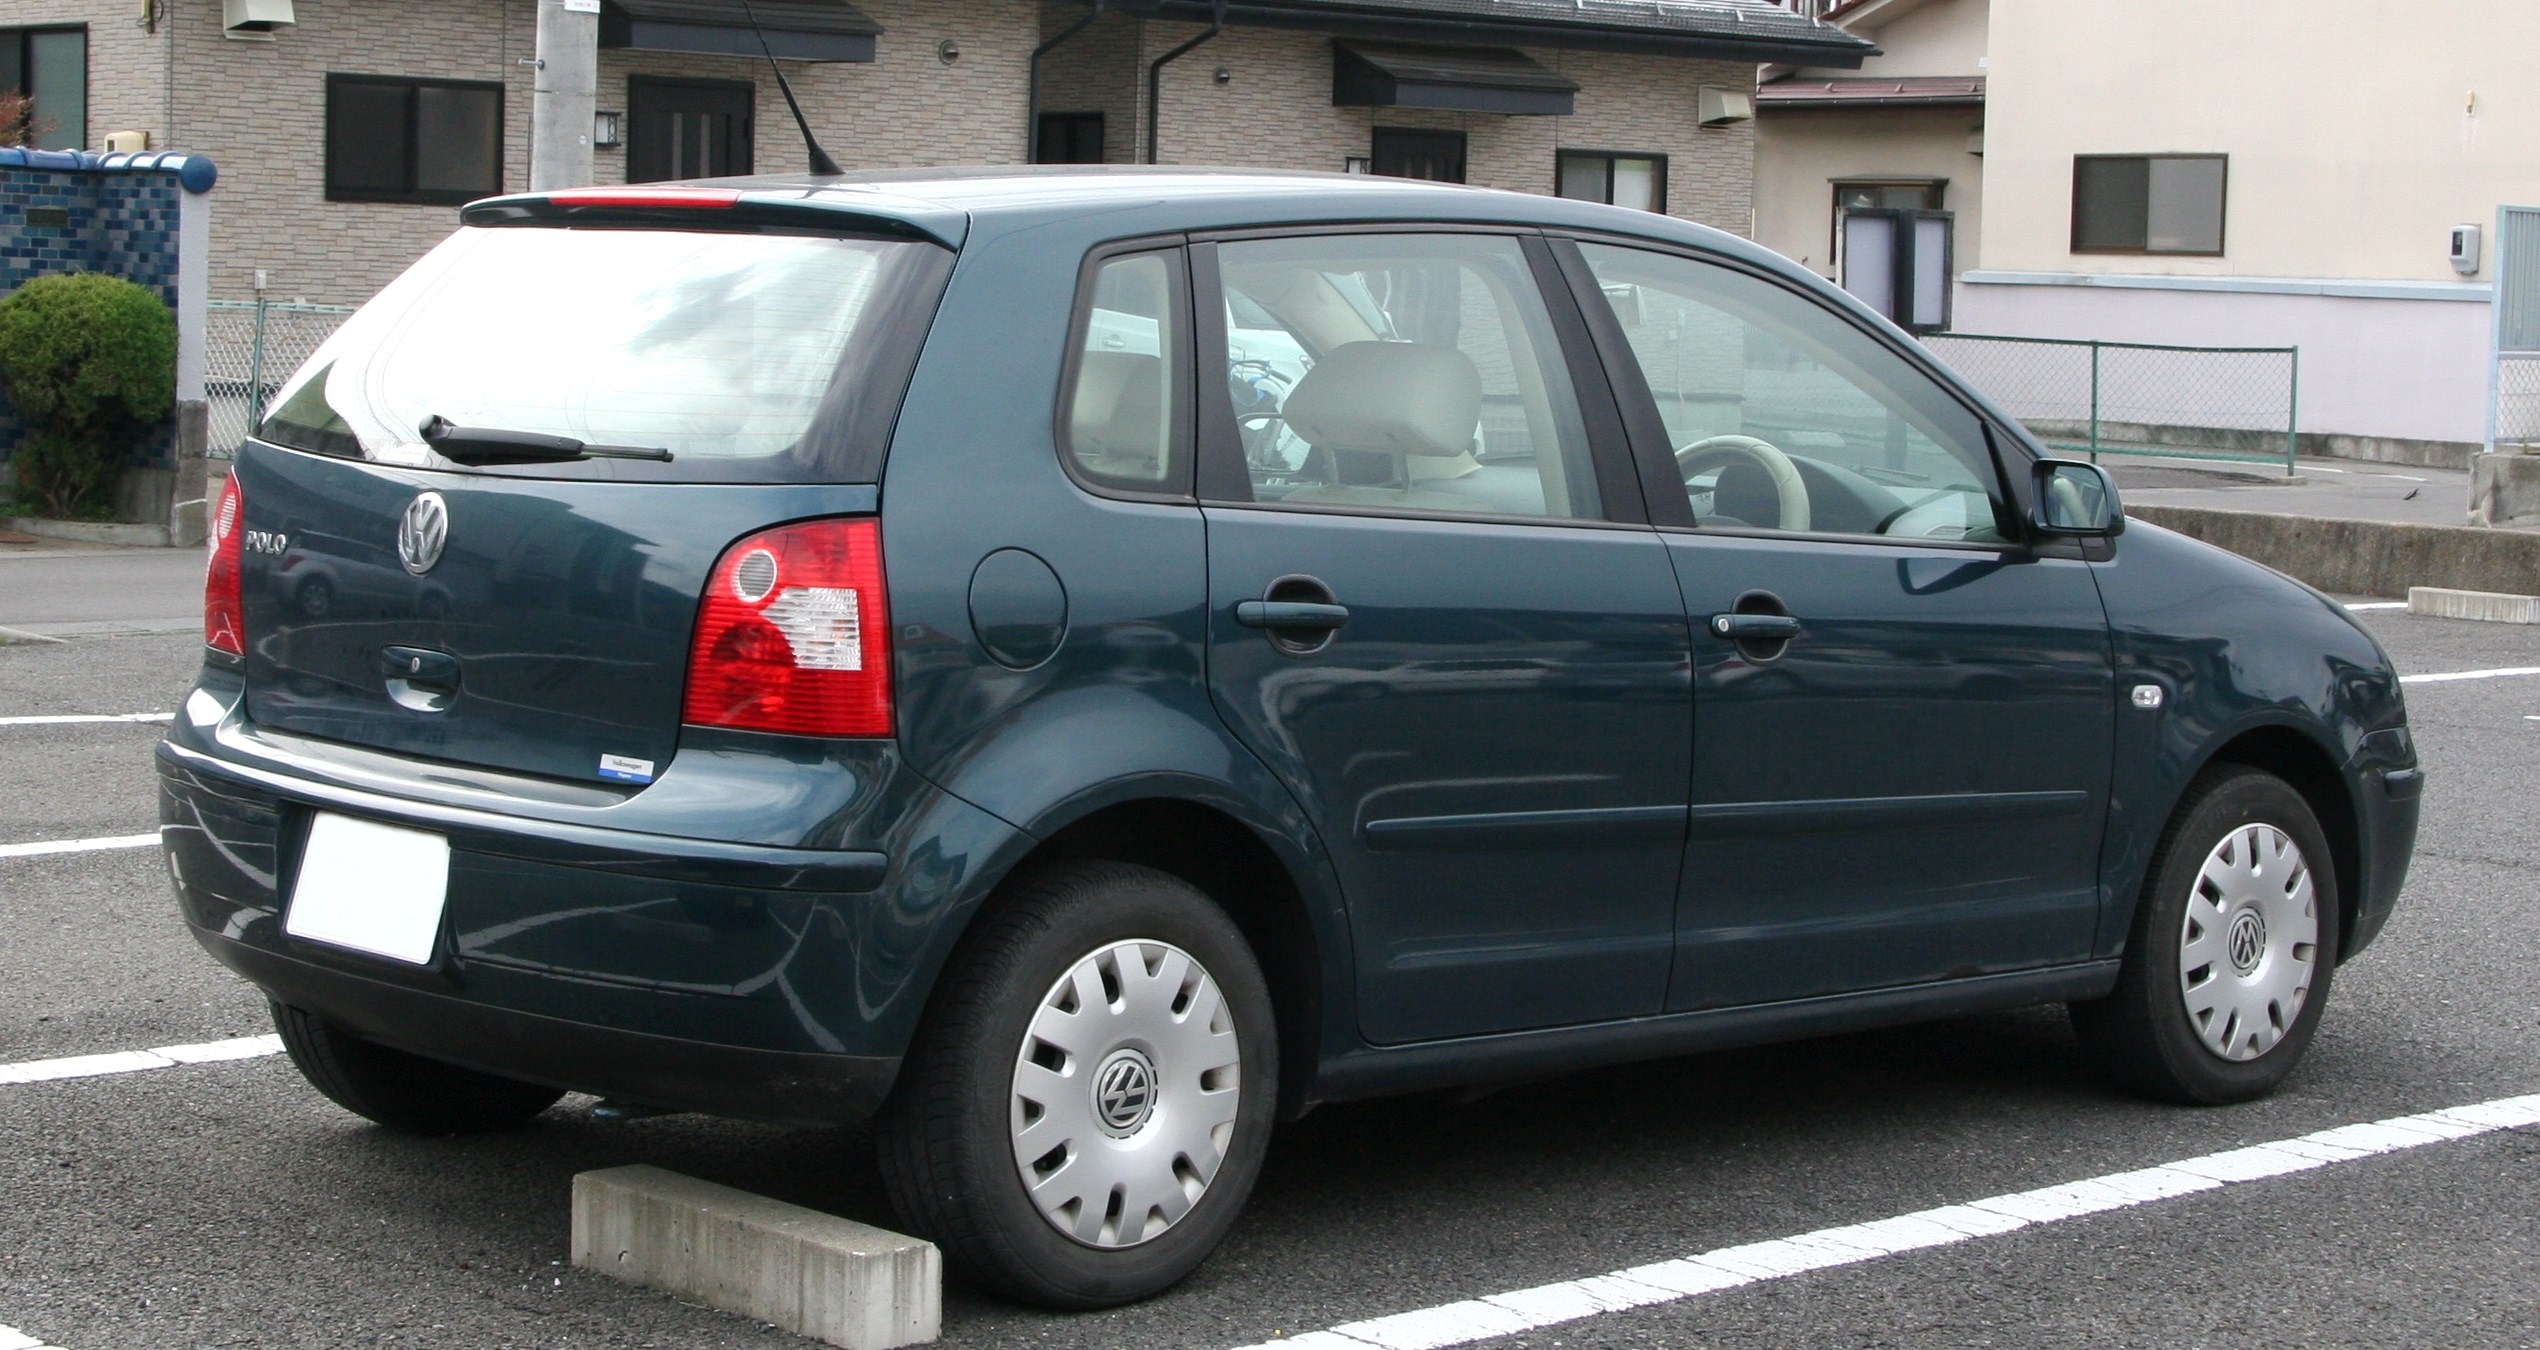 Category:Volkswagen Polo - Wikimedia Commons